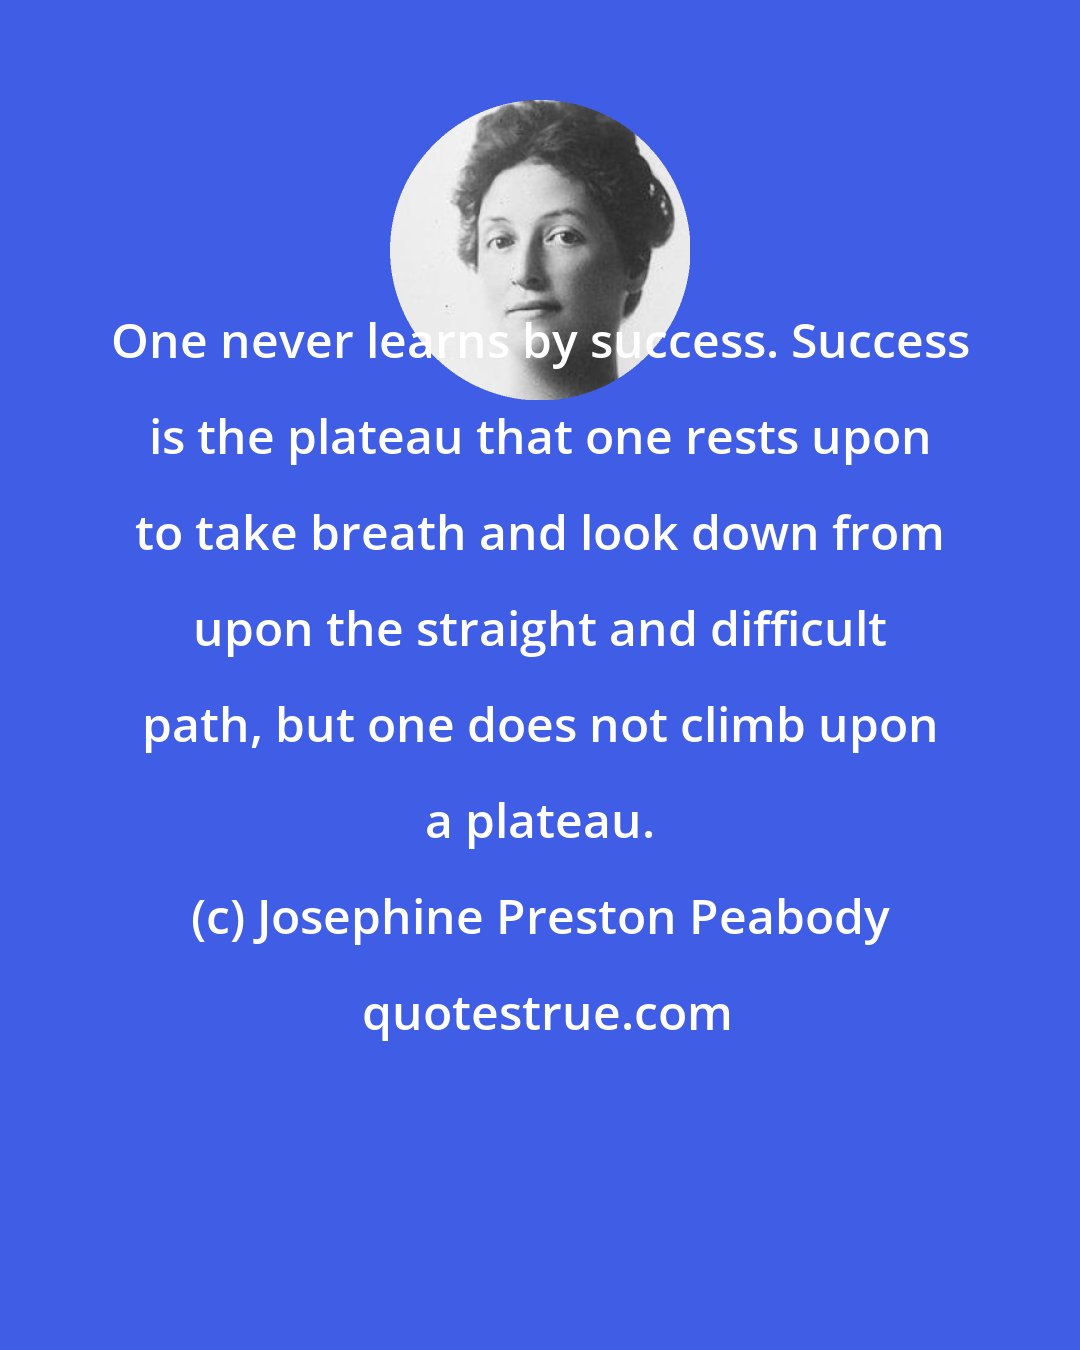 Josephine Preston Peabody: One never learns by success. Success is the plateau that one rests upon to take breath and look down from upon the straight and difficult path, but one does not climb upon a plateau.